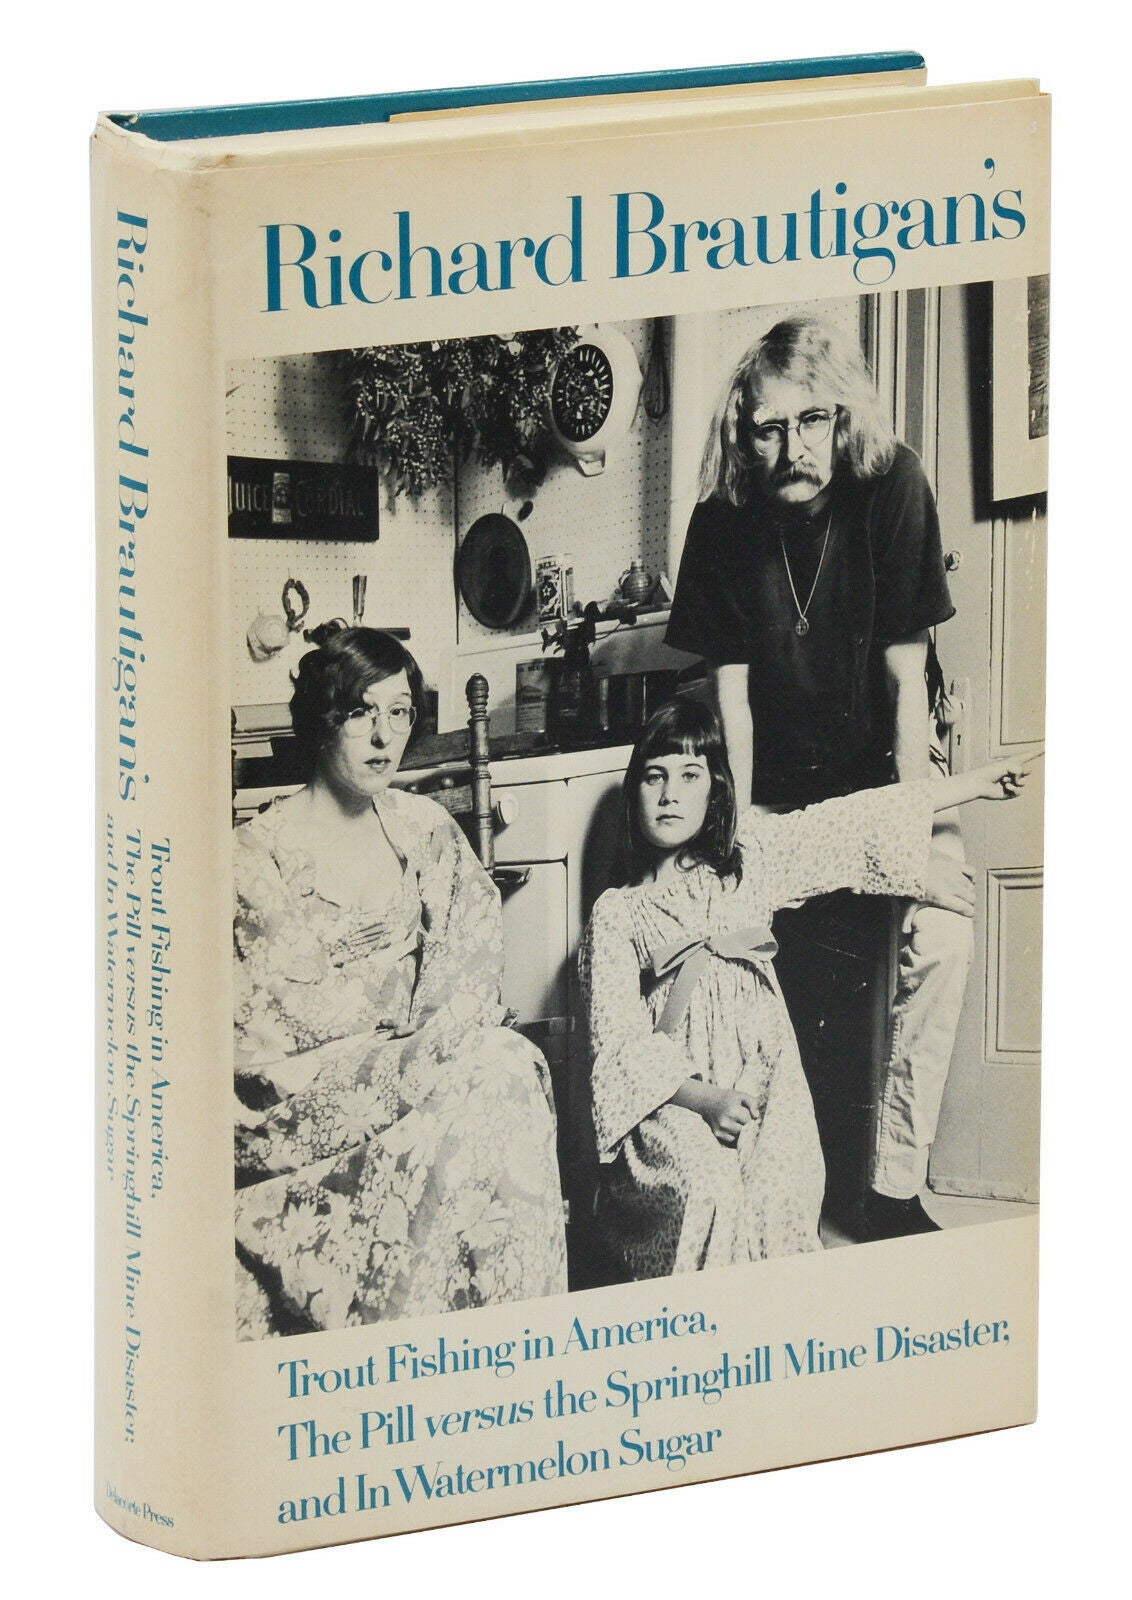 Trout Fishing in America, The Pill versus the Springhill Mine Disaster, &  In Watermelon Sugar by Richard Brautigan on Burnside Rare Books